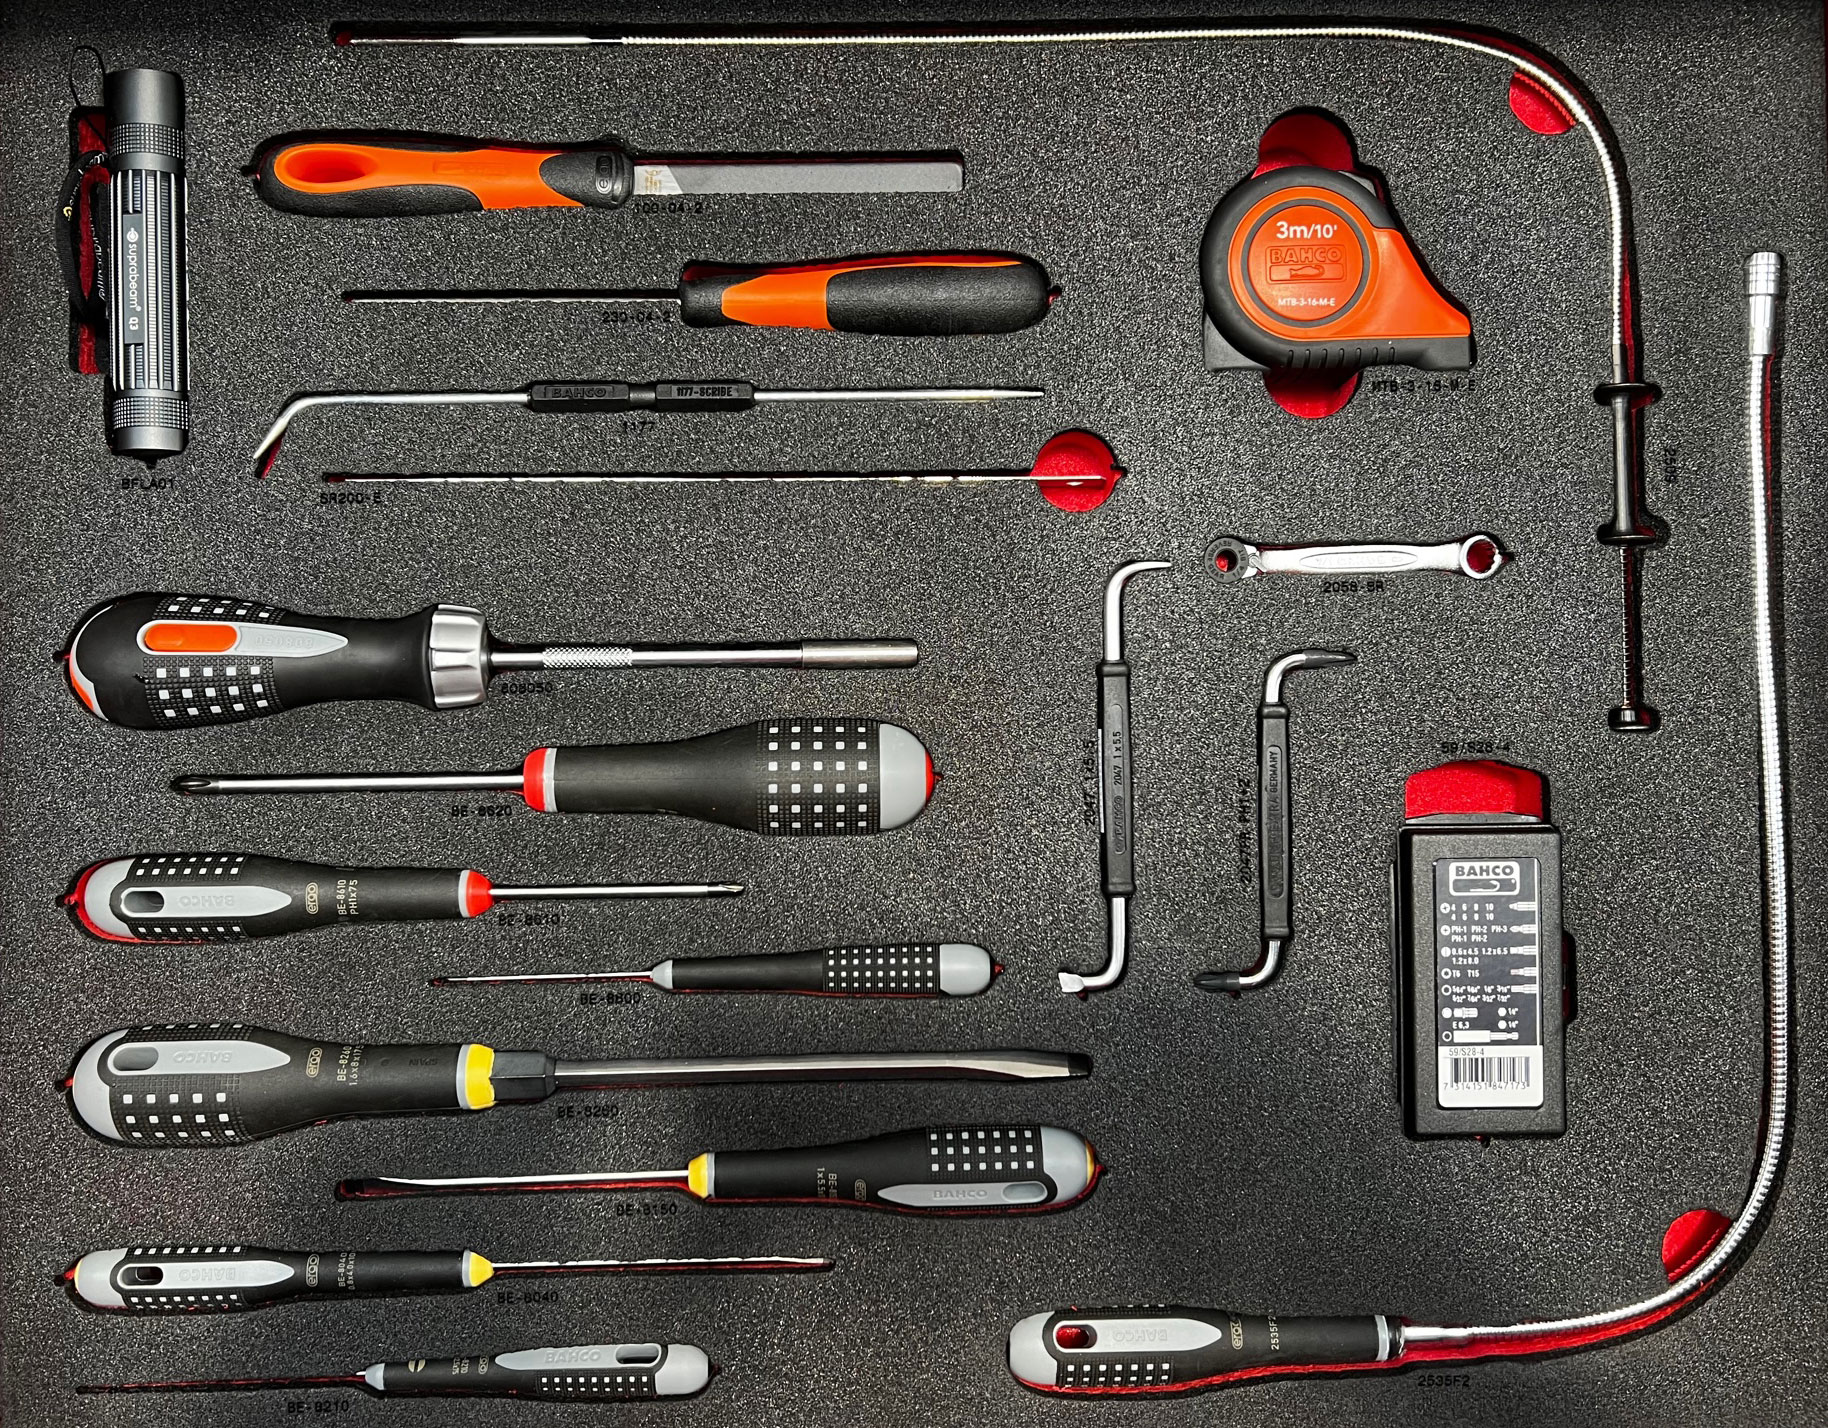 Aircraft Mechanic Kit with Imperial (SAE / Standard) tools. In 8 drawer  cabinet - RBI9400C - Red Box Tools